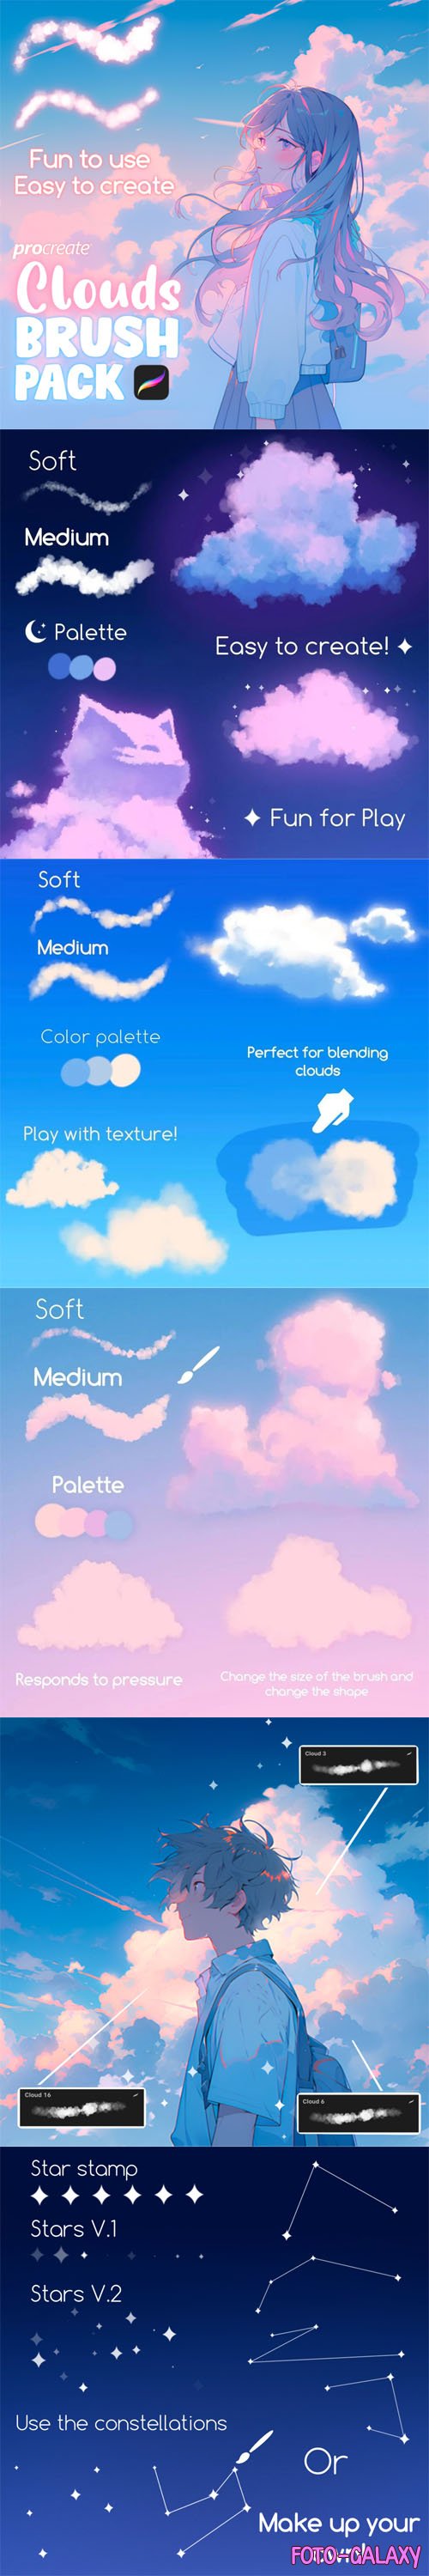 Clouds Brushes Pack for Procreate